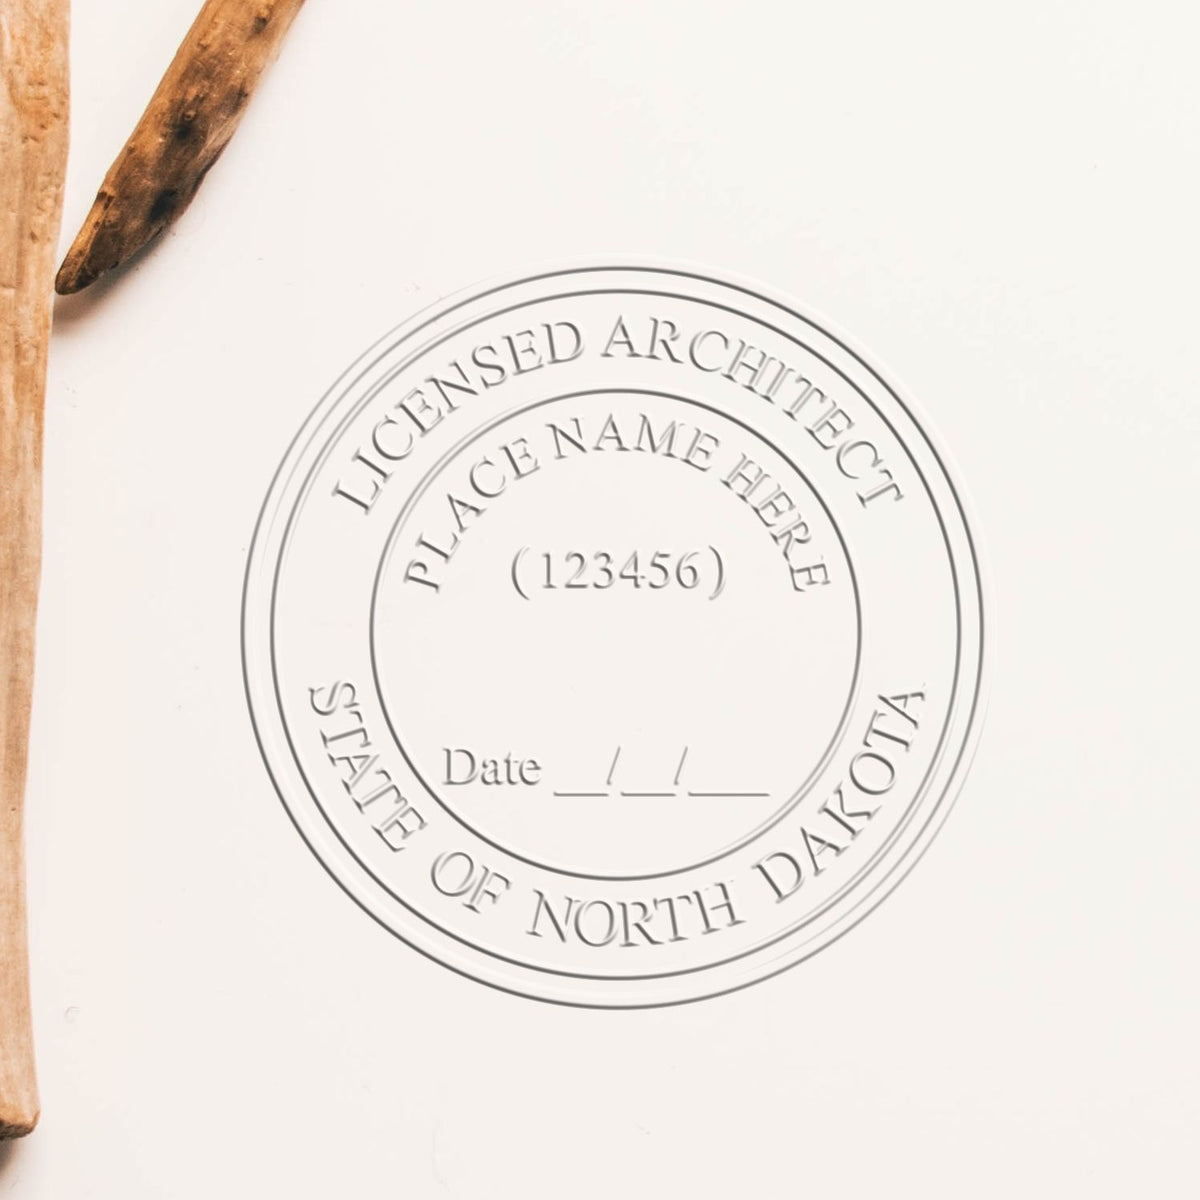 The Gift North Dakota Architect Seal stamp impression comes to life with a crisp, detailed image stamped on paper - showcasing true professional quality.